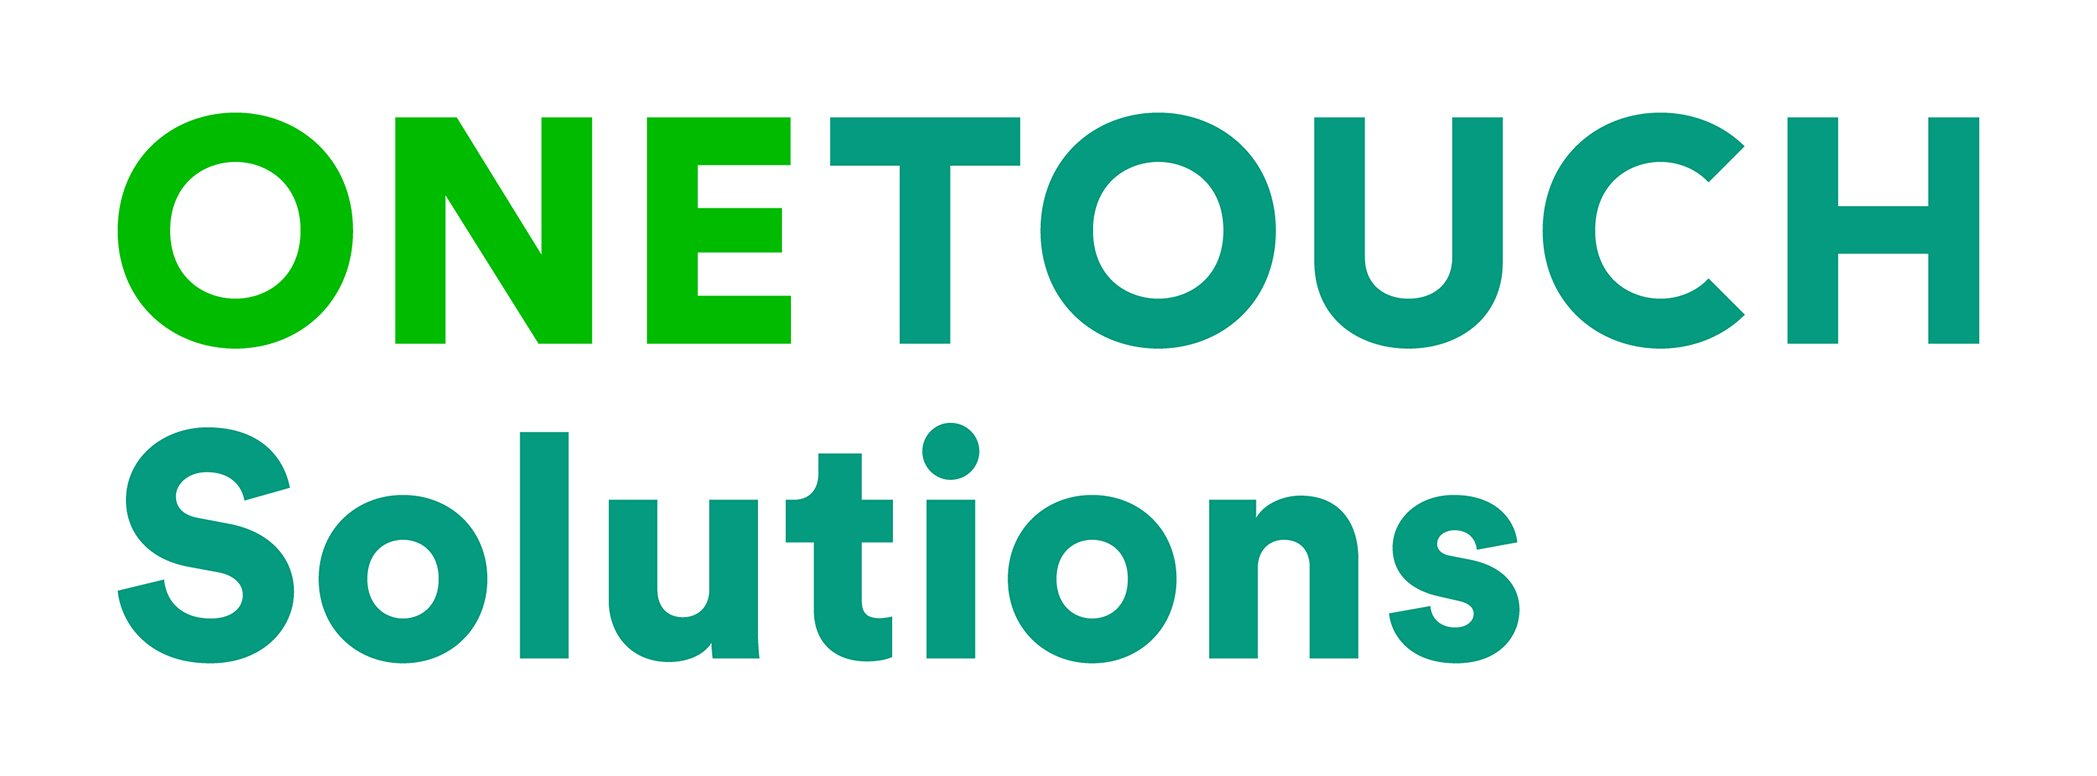  ONETOUCH SOLUTIONS